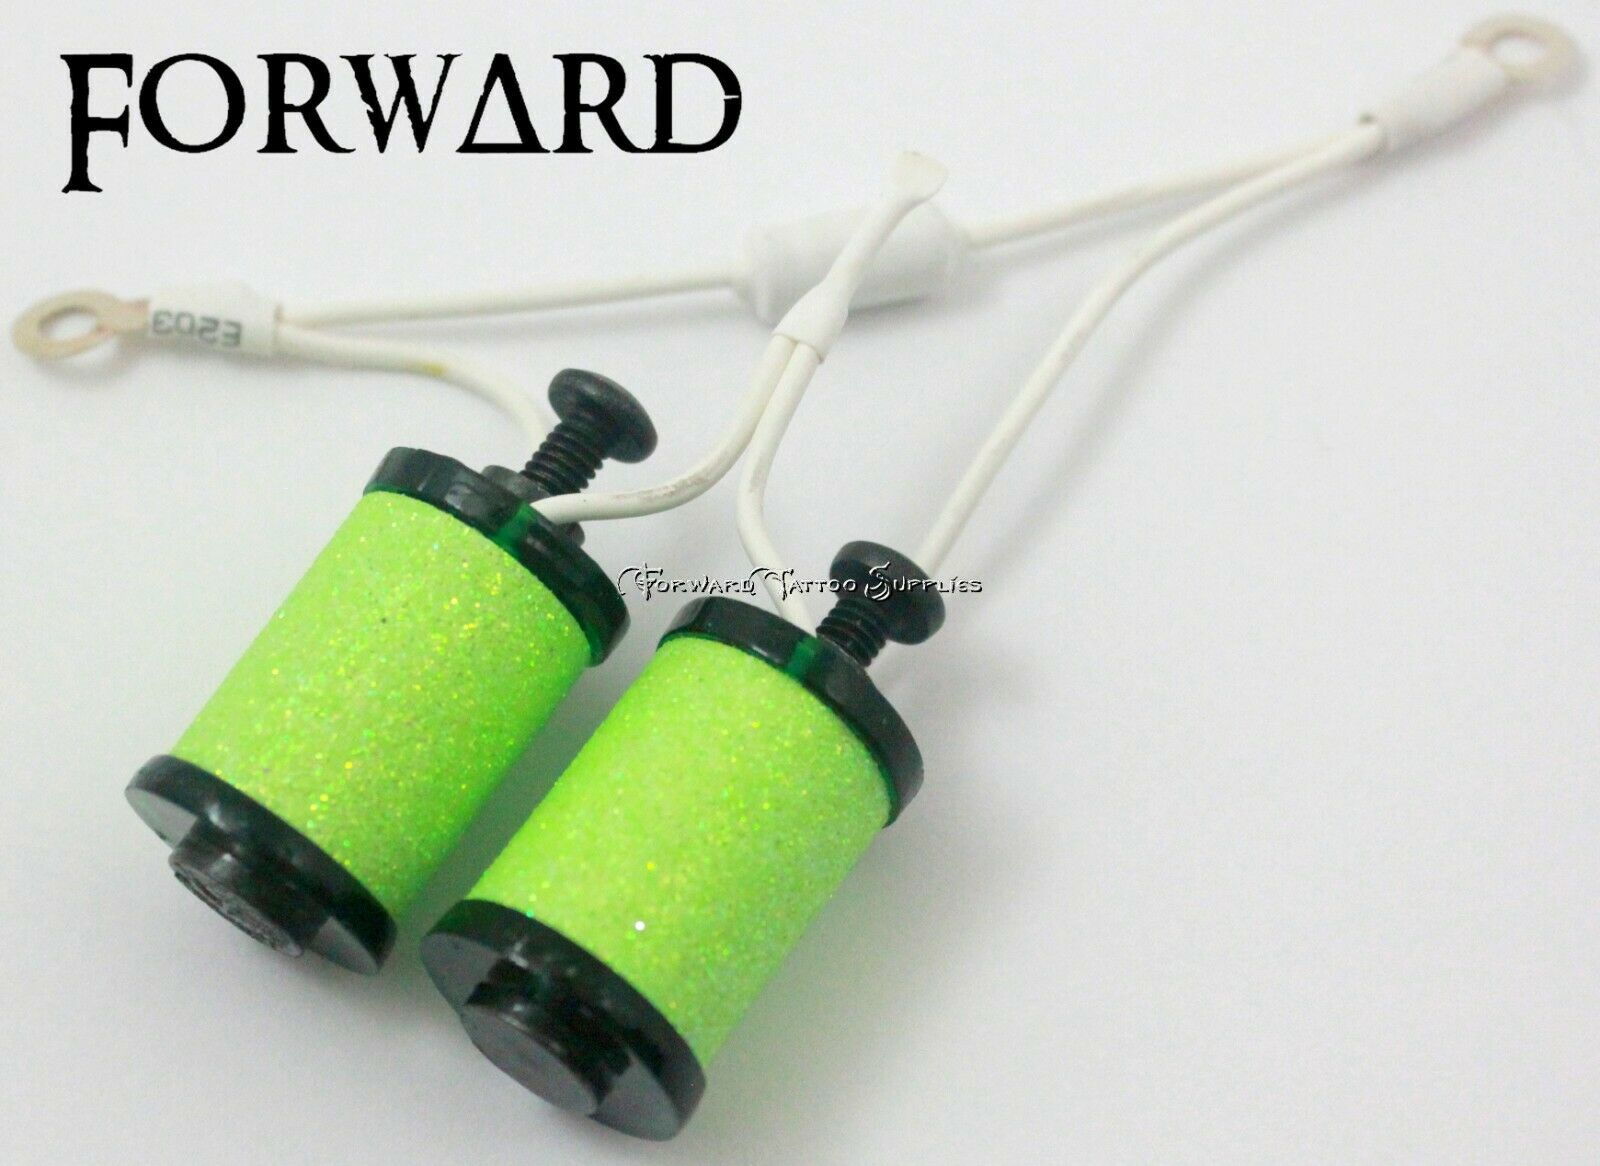 1.25" 8-32 Tattoo Machine Parts Coils 8 Wrap Hunter Washers Lime Glitter Covers